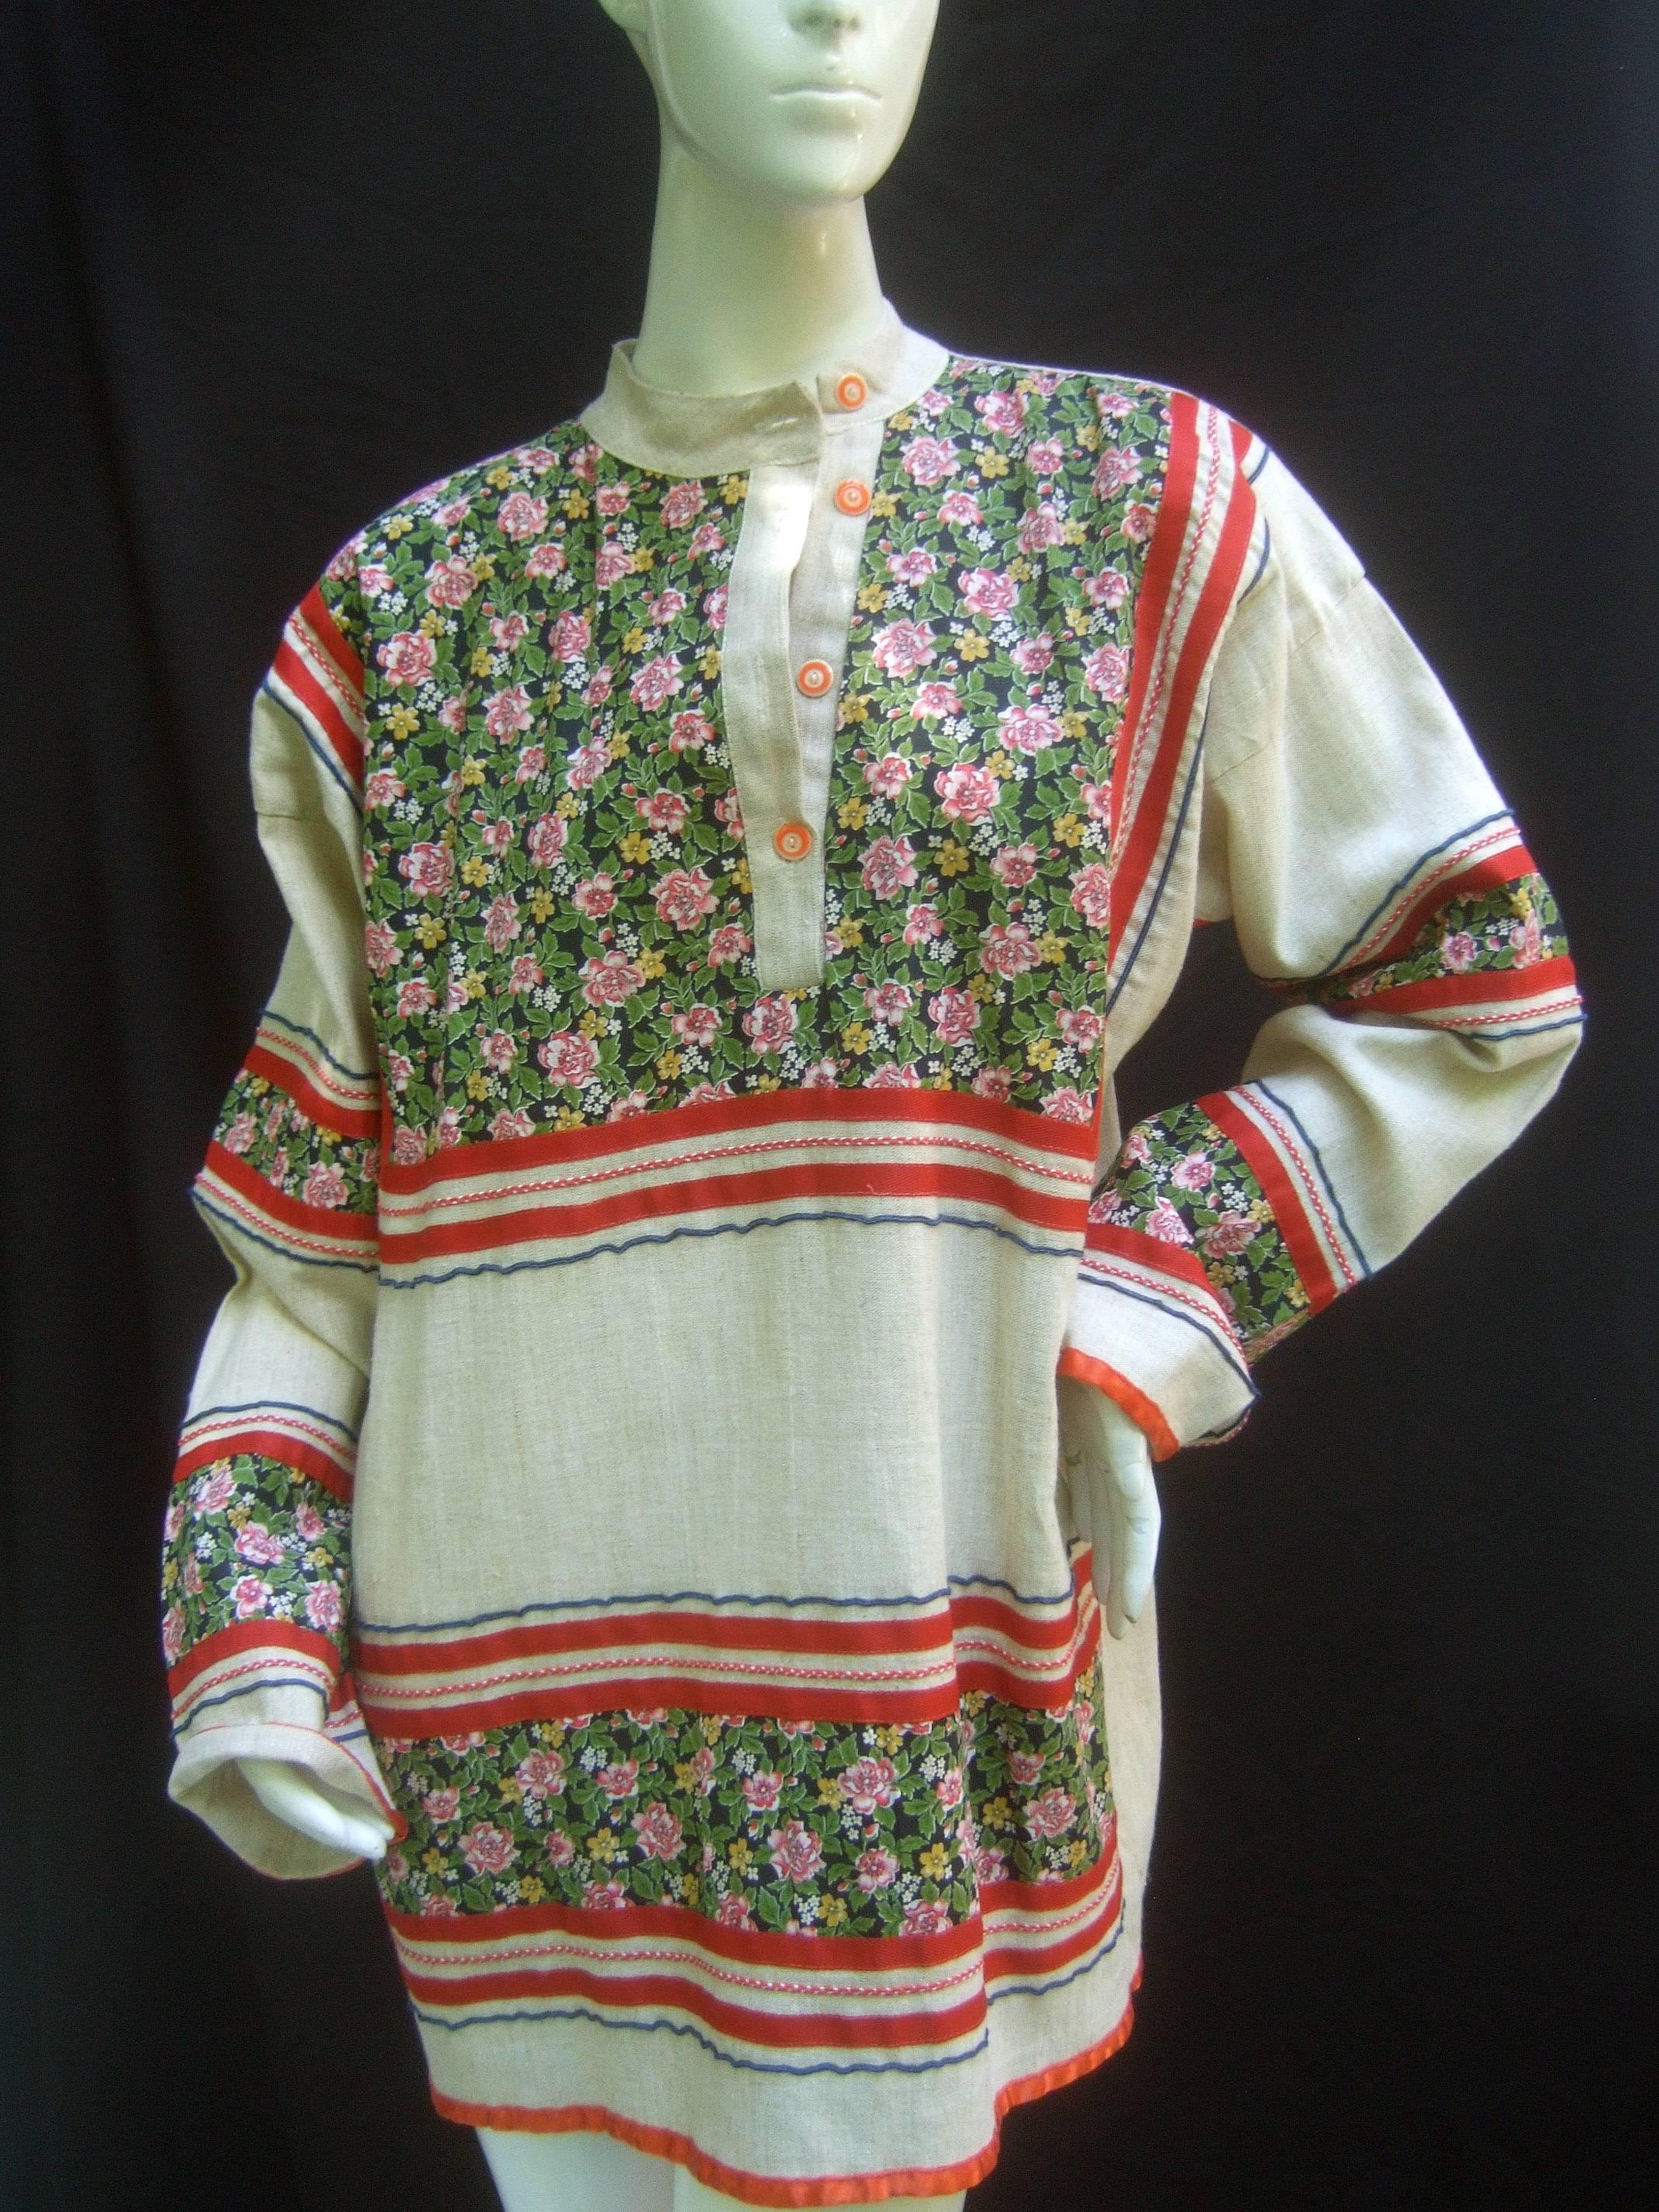 Saks Fifth Avenue Bohemian cotton festival tunic c 1970s 
The hippie chic cotton tunic is designed with floral 
panels that run across the bodice, sleeves and lower
front section

The Nehru style collar buttons with a set of red
and white resin